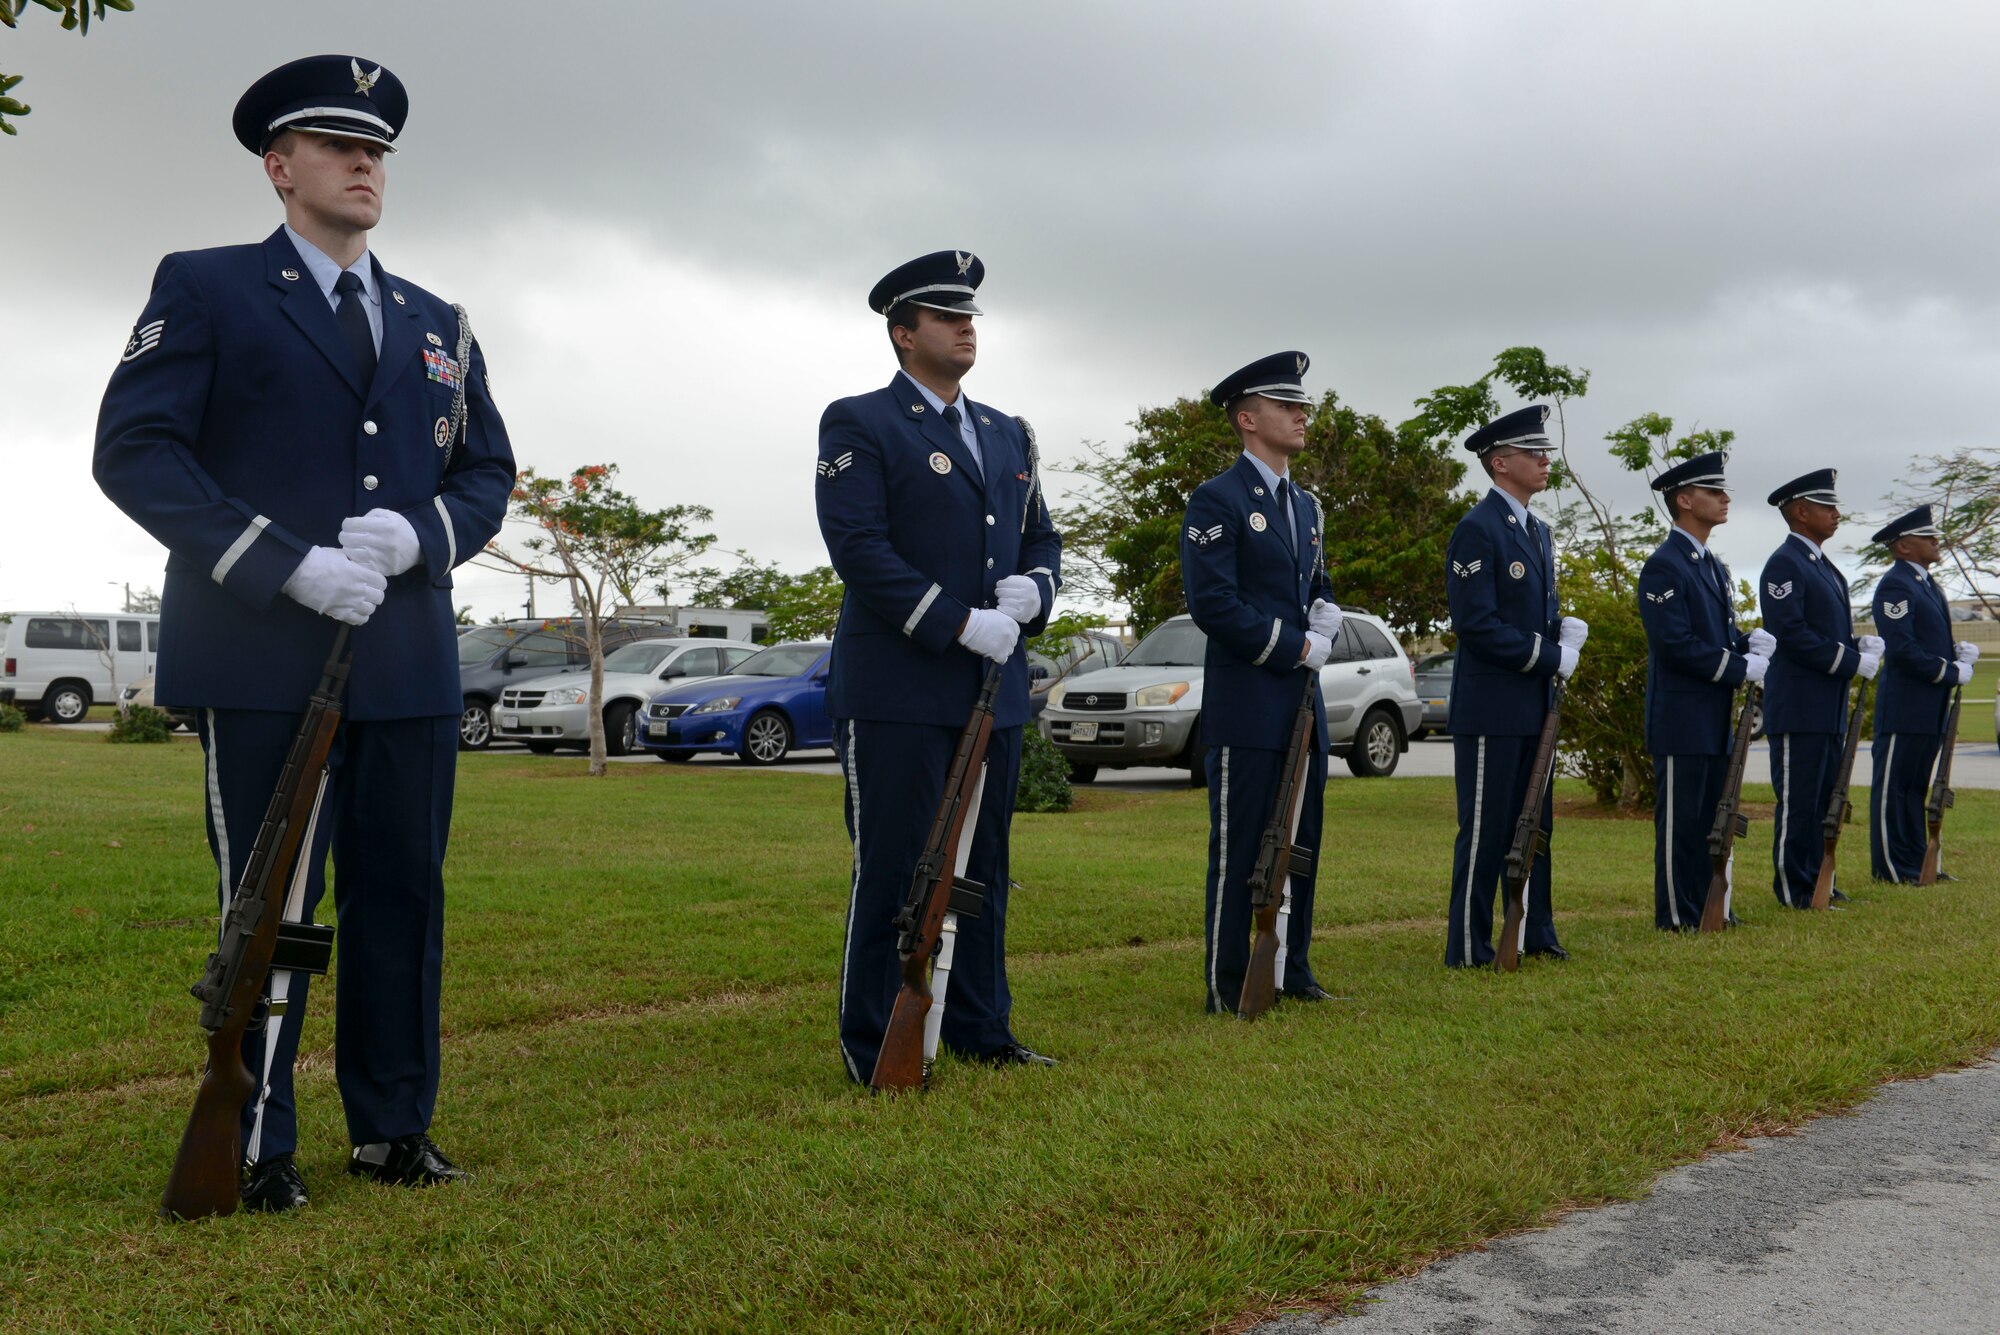 The base honor guard team lowers the flag to half-staff during the Linebacker II ceremony Dec. 13, 2013, on Andersen Air Force Base, Guam. The flag will be at half-staff for 11 days, representing Operation Linebacker II, which led to the end of the Vietnam War in 1972. (U.S. Air Force photo by Airman 1st Class Emily A. Bradley/Released)